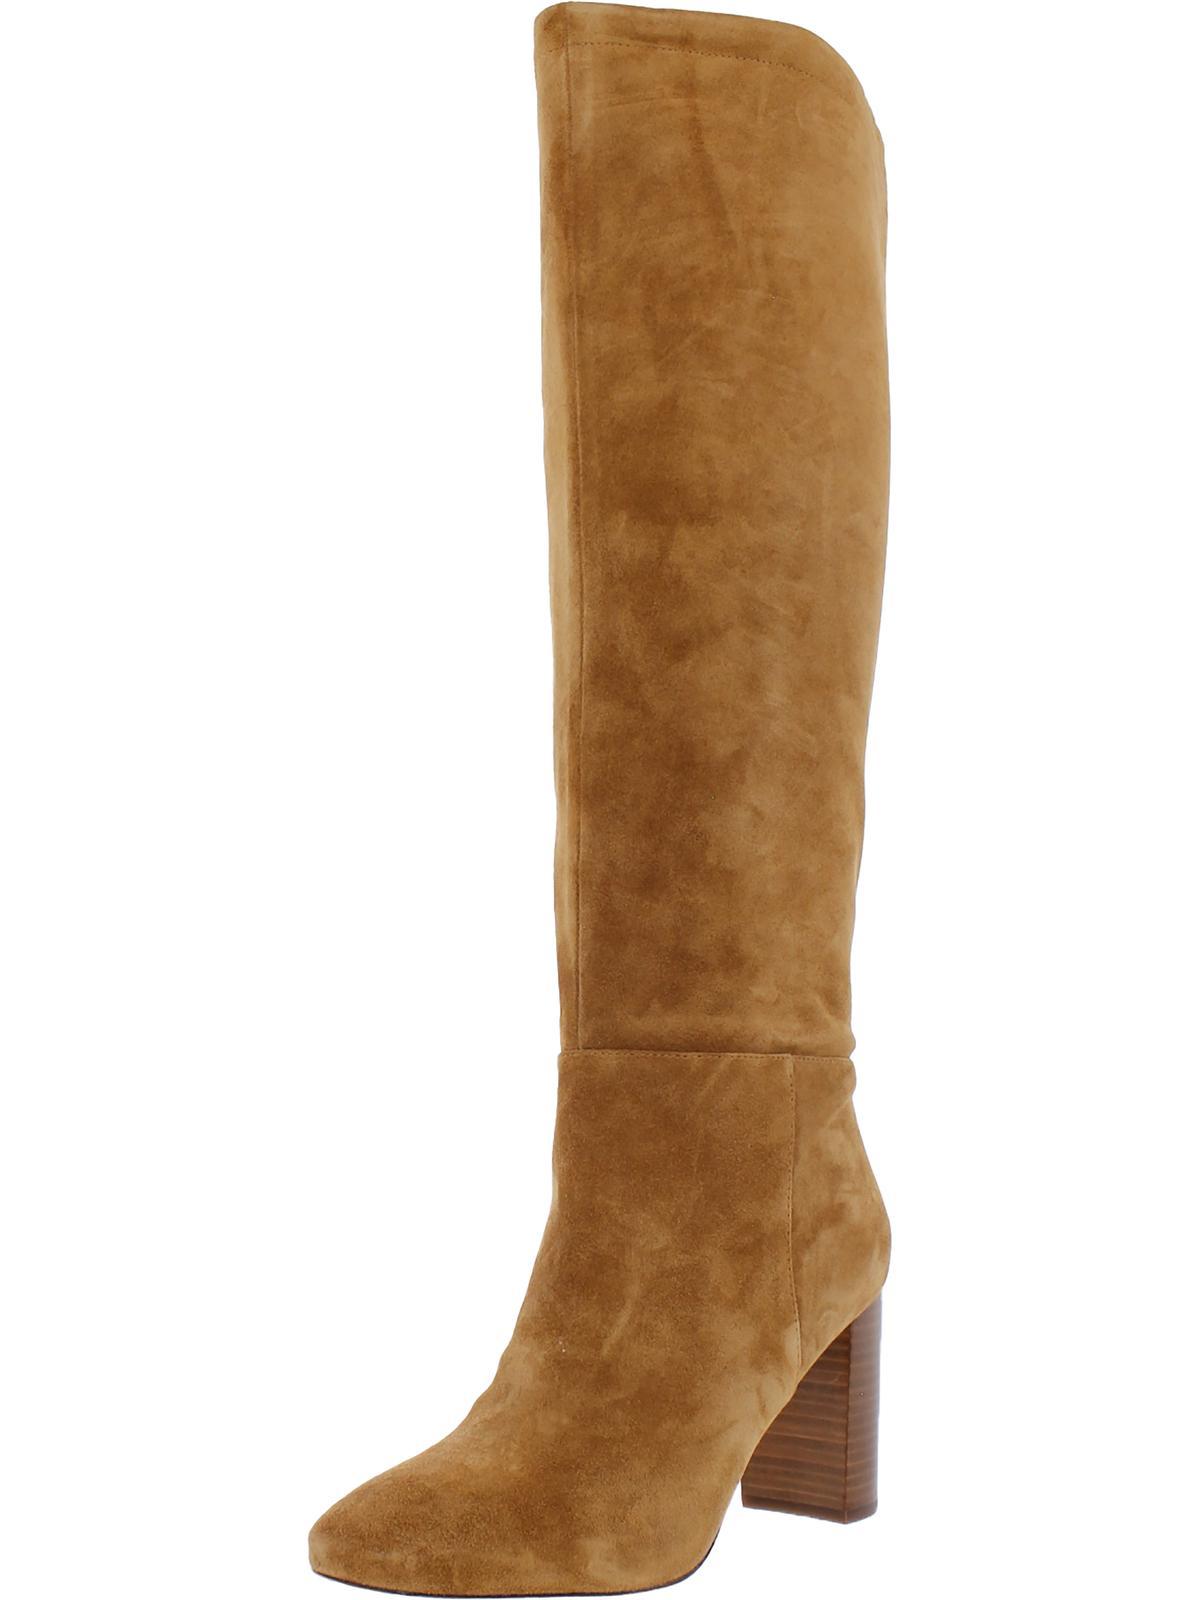 Vince Bexley Zipper Tall Knee-high Boots in Natural | Lyst